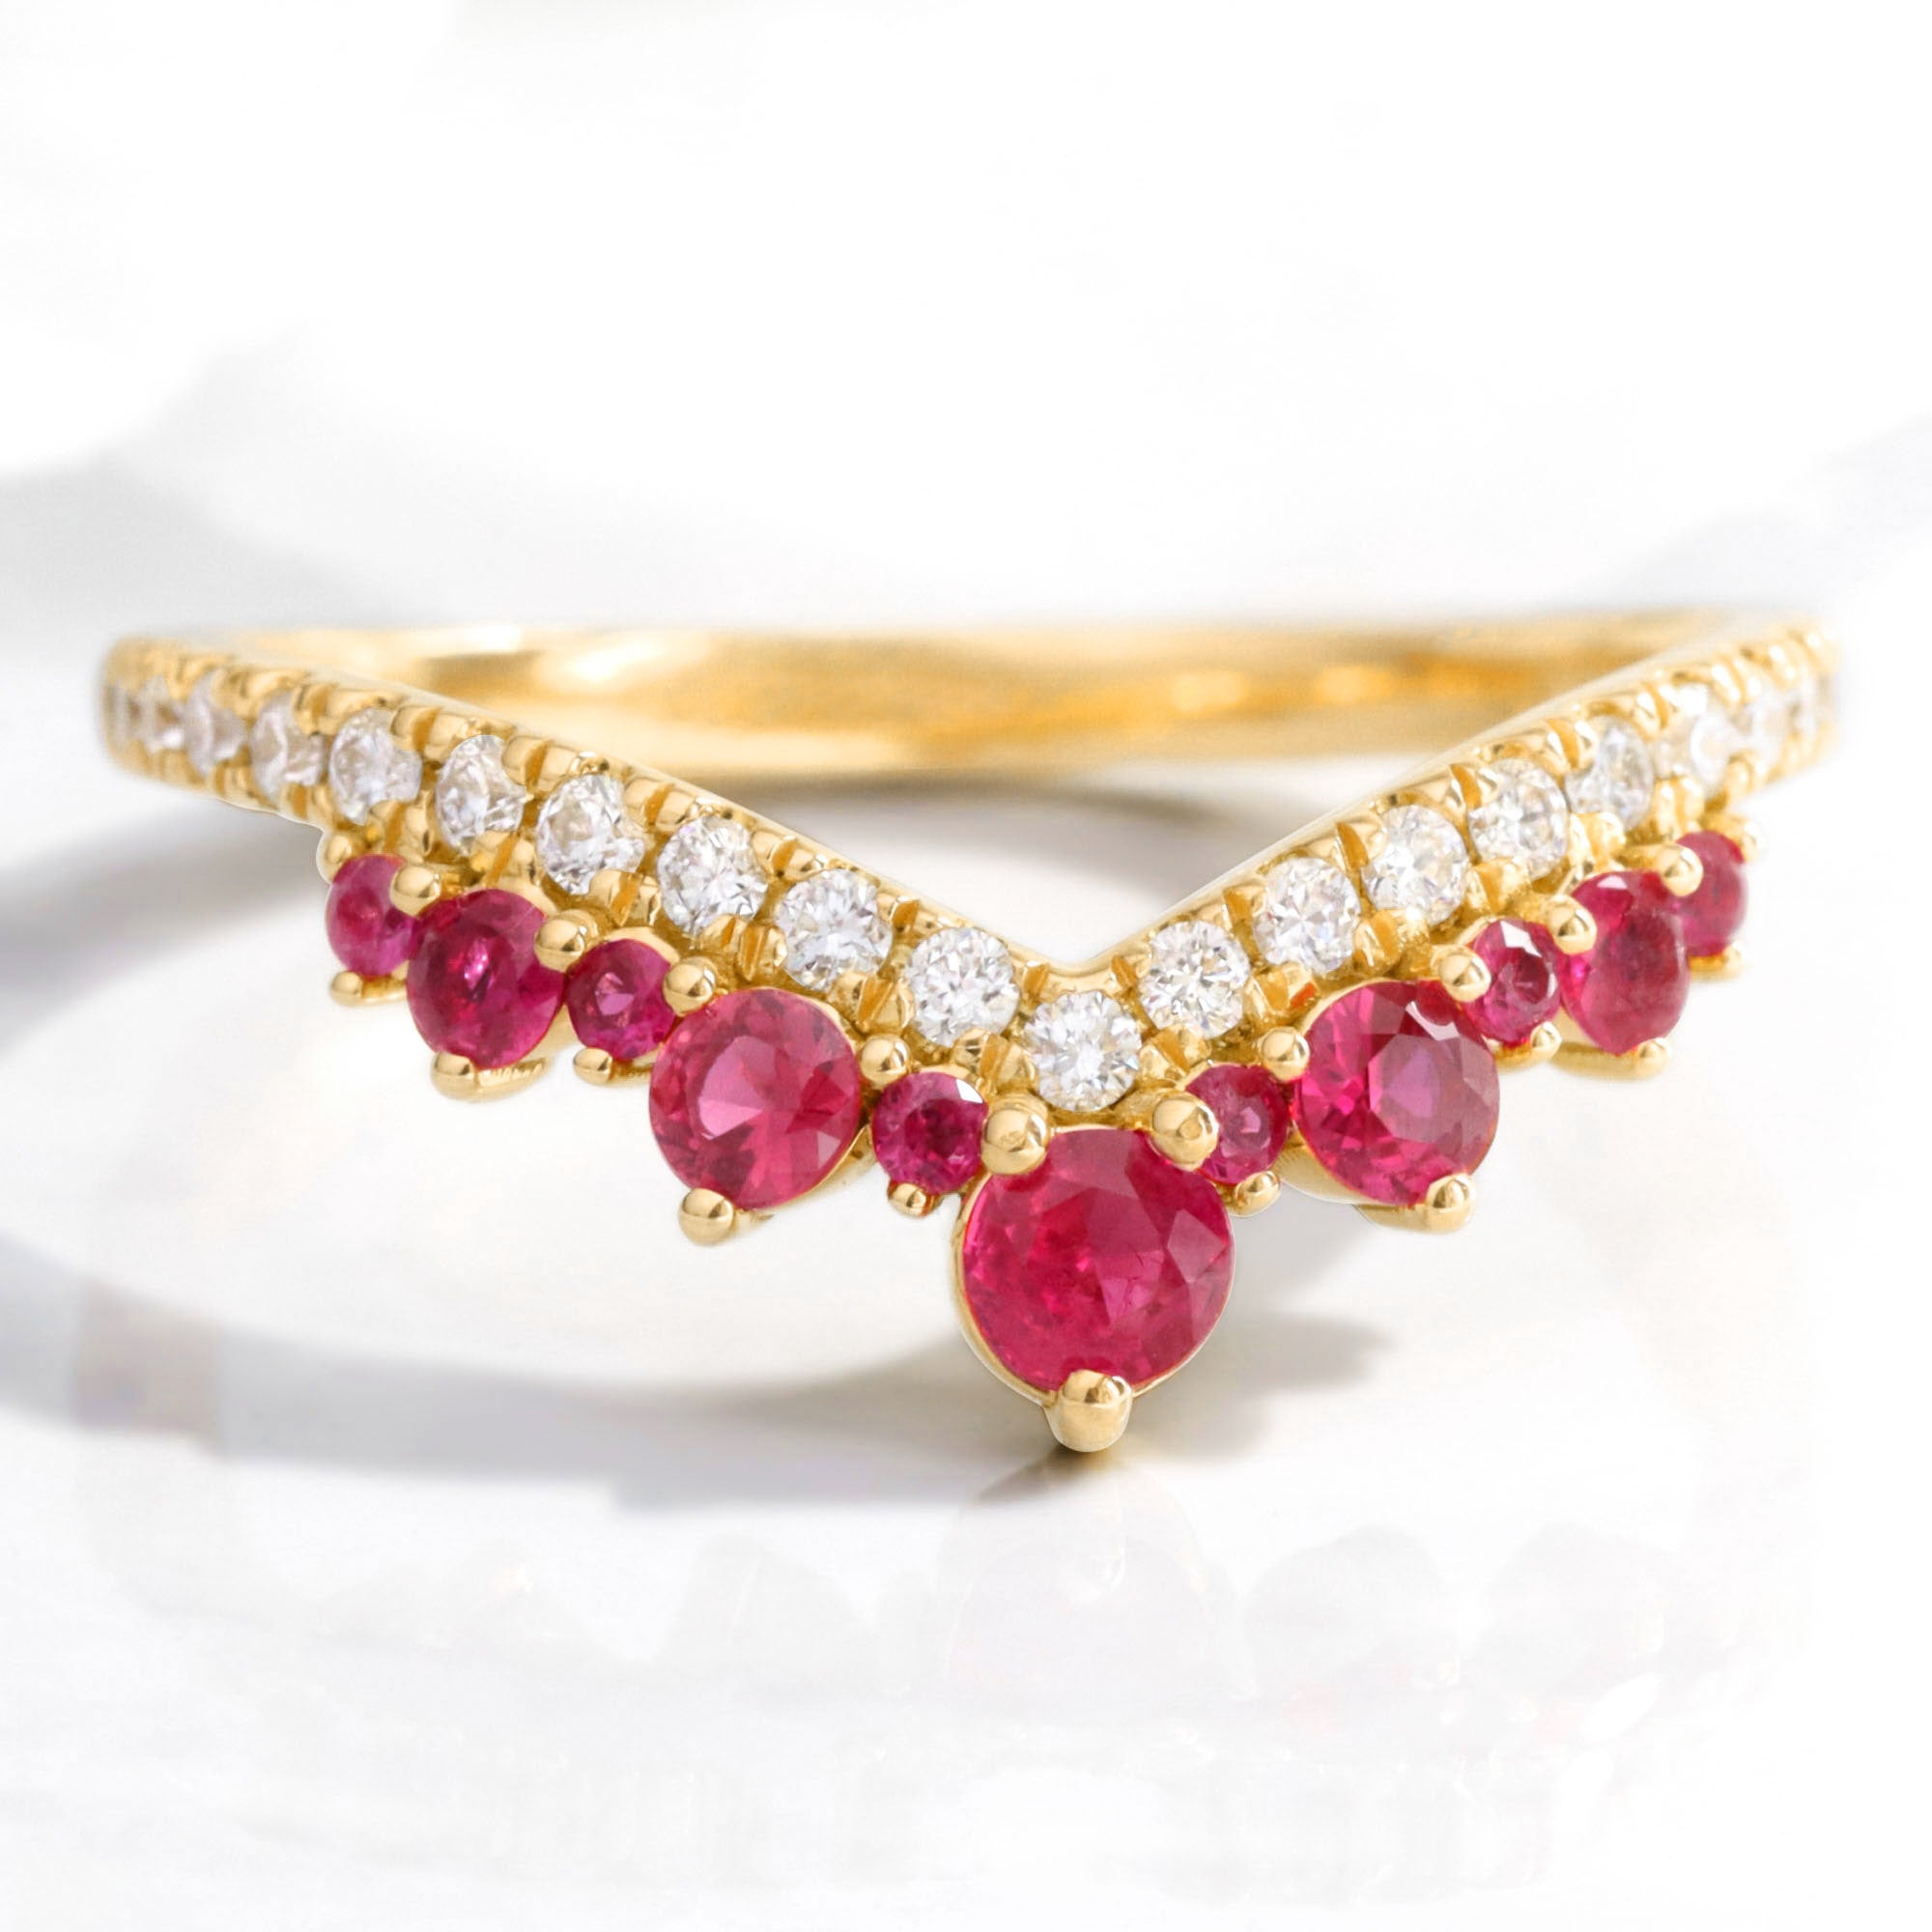 ruby and diamond wedding band yellow gold v shaped wedding ring la more design jewelry